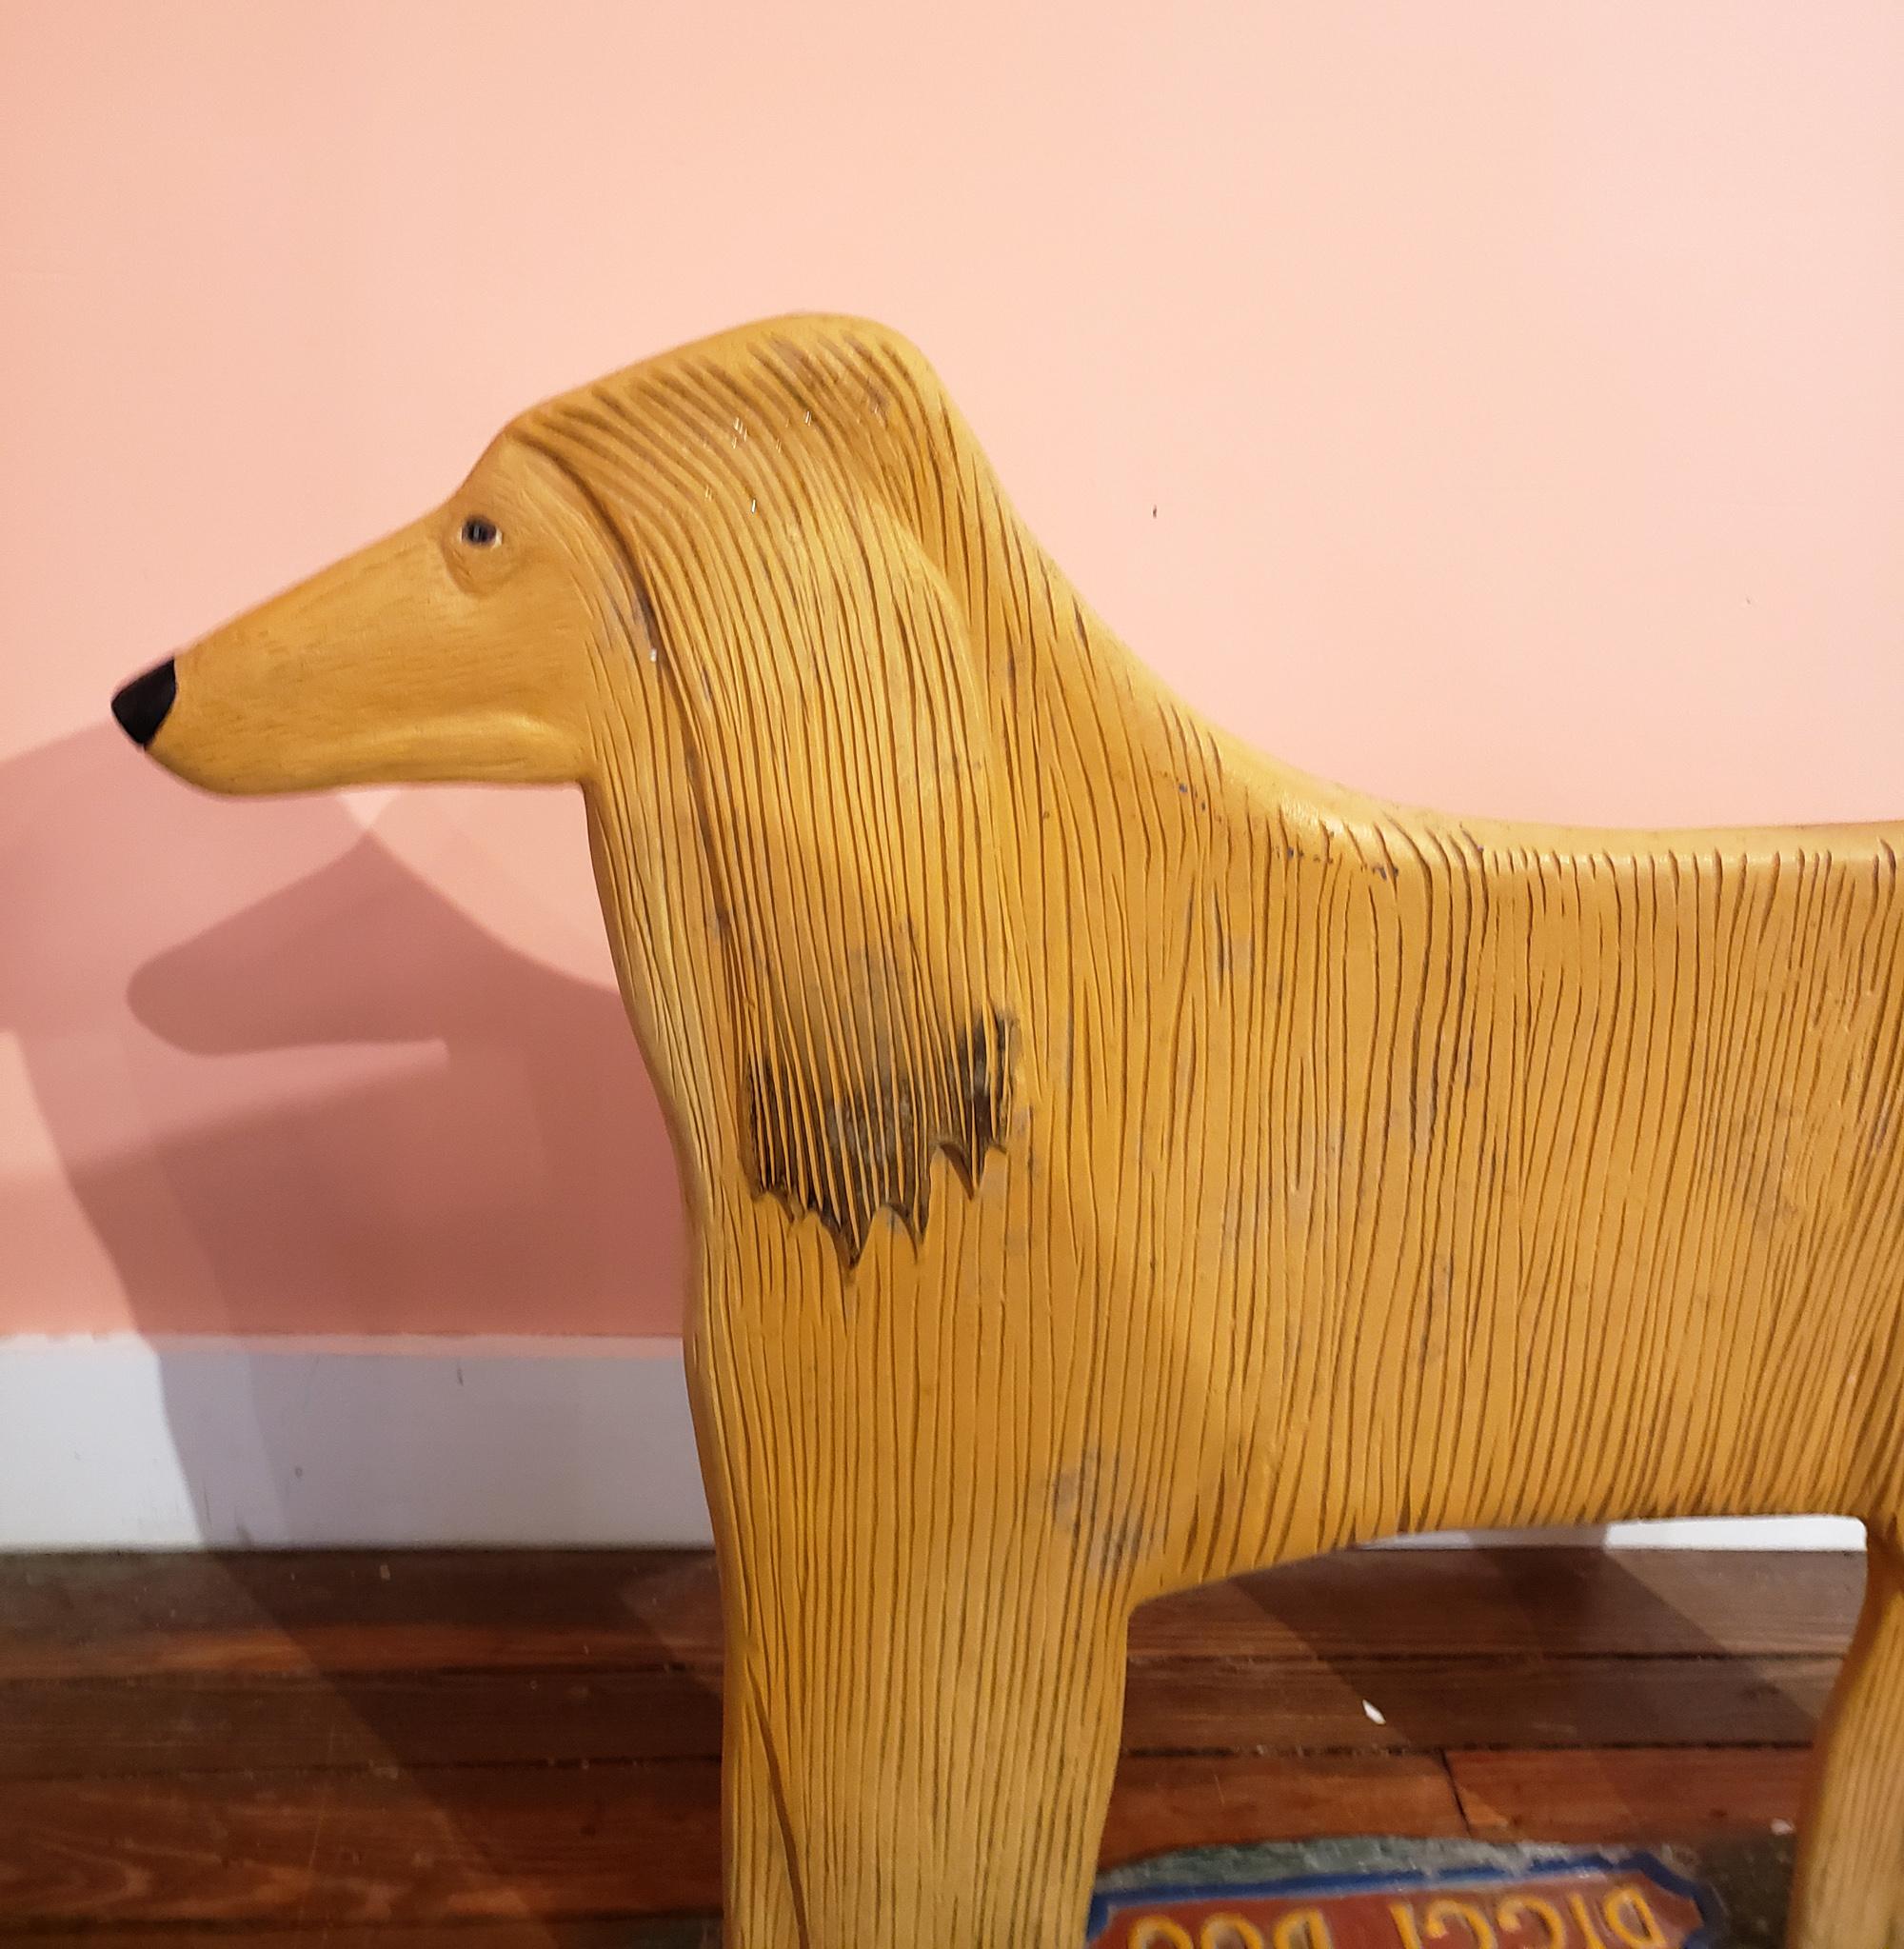 Afghan Dog Sculptures, by Stephen Huneck, Vermont, 1991, Signed and Dated 2